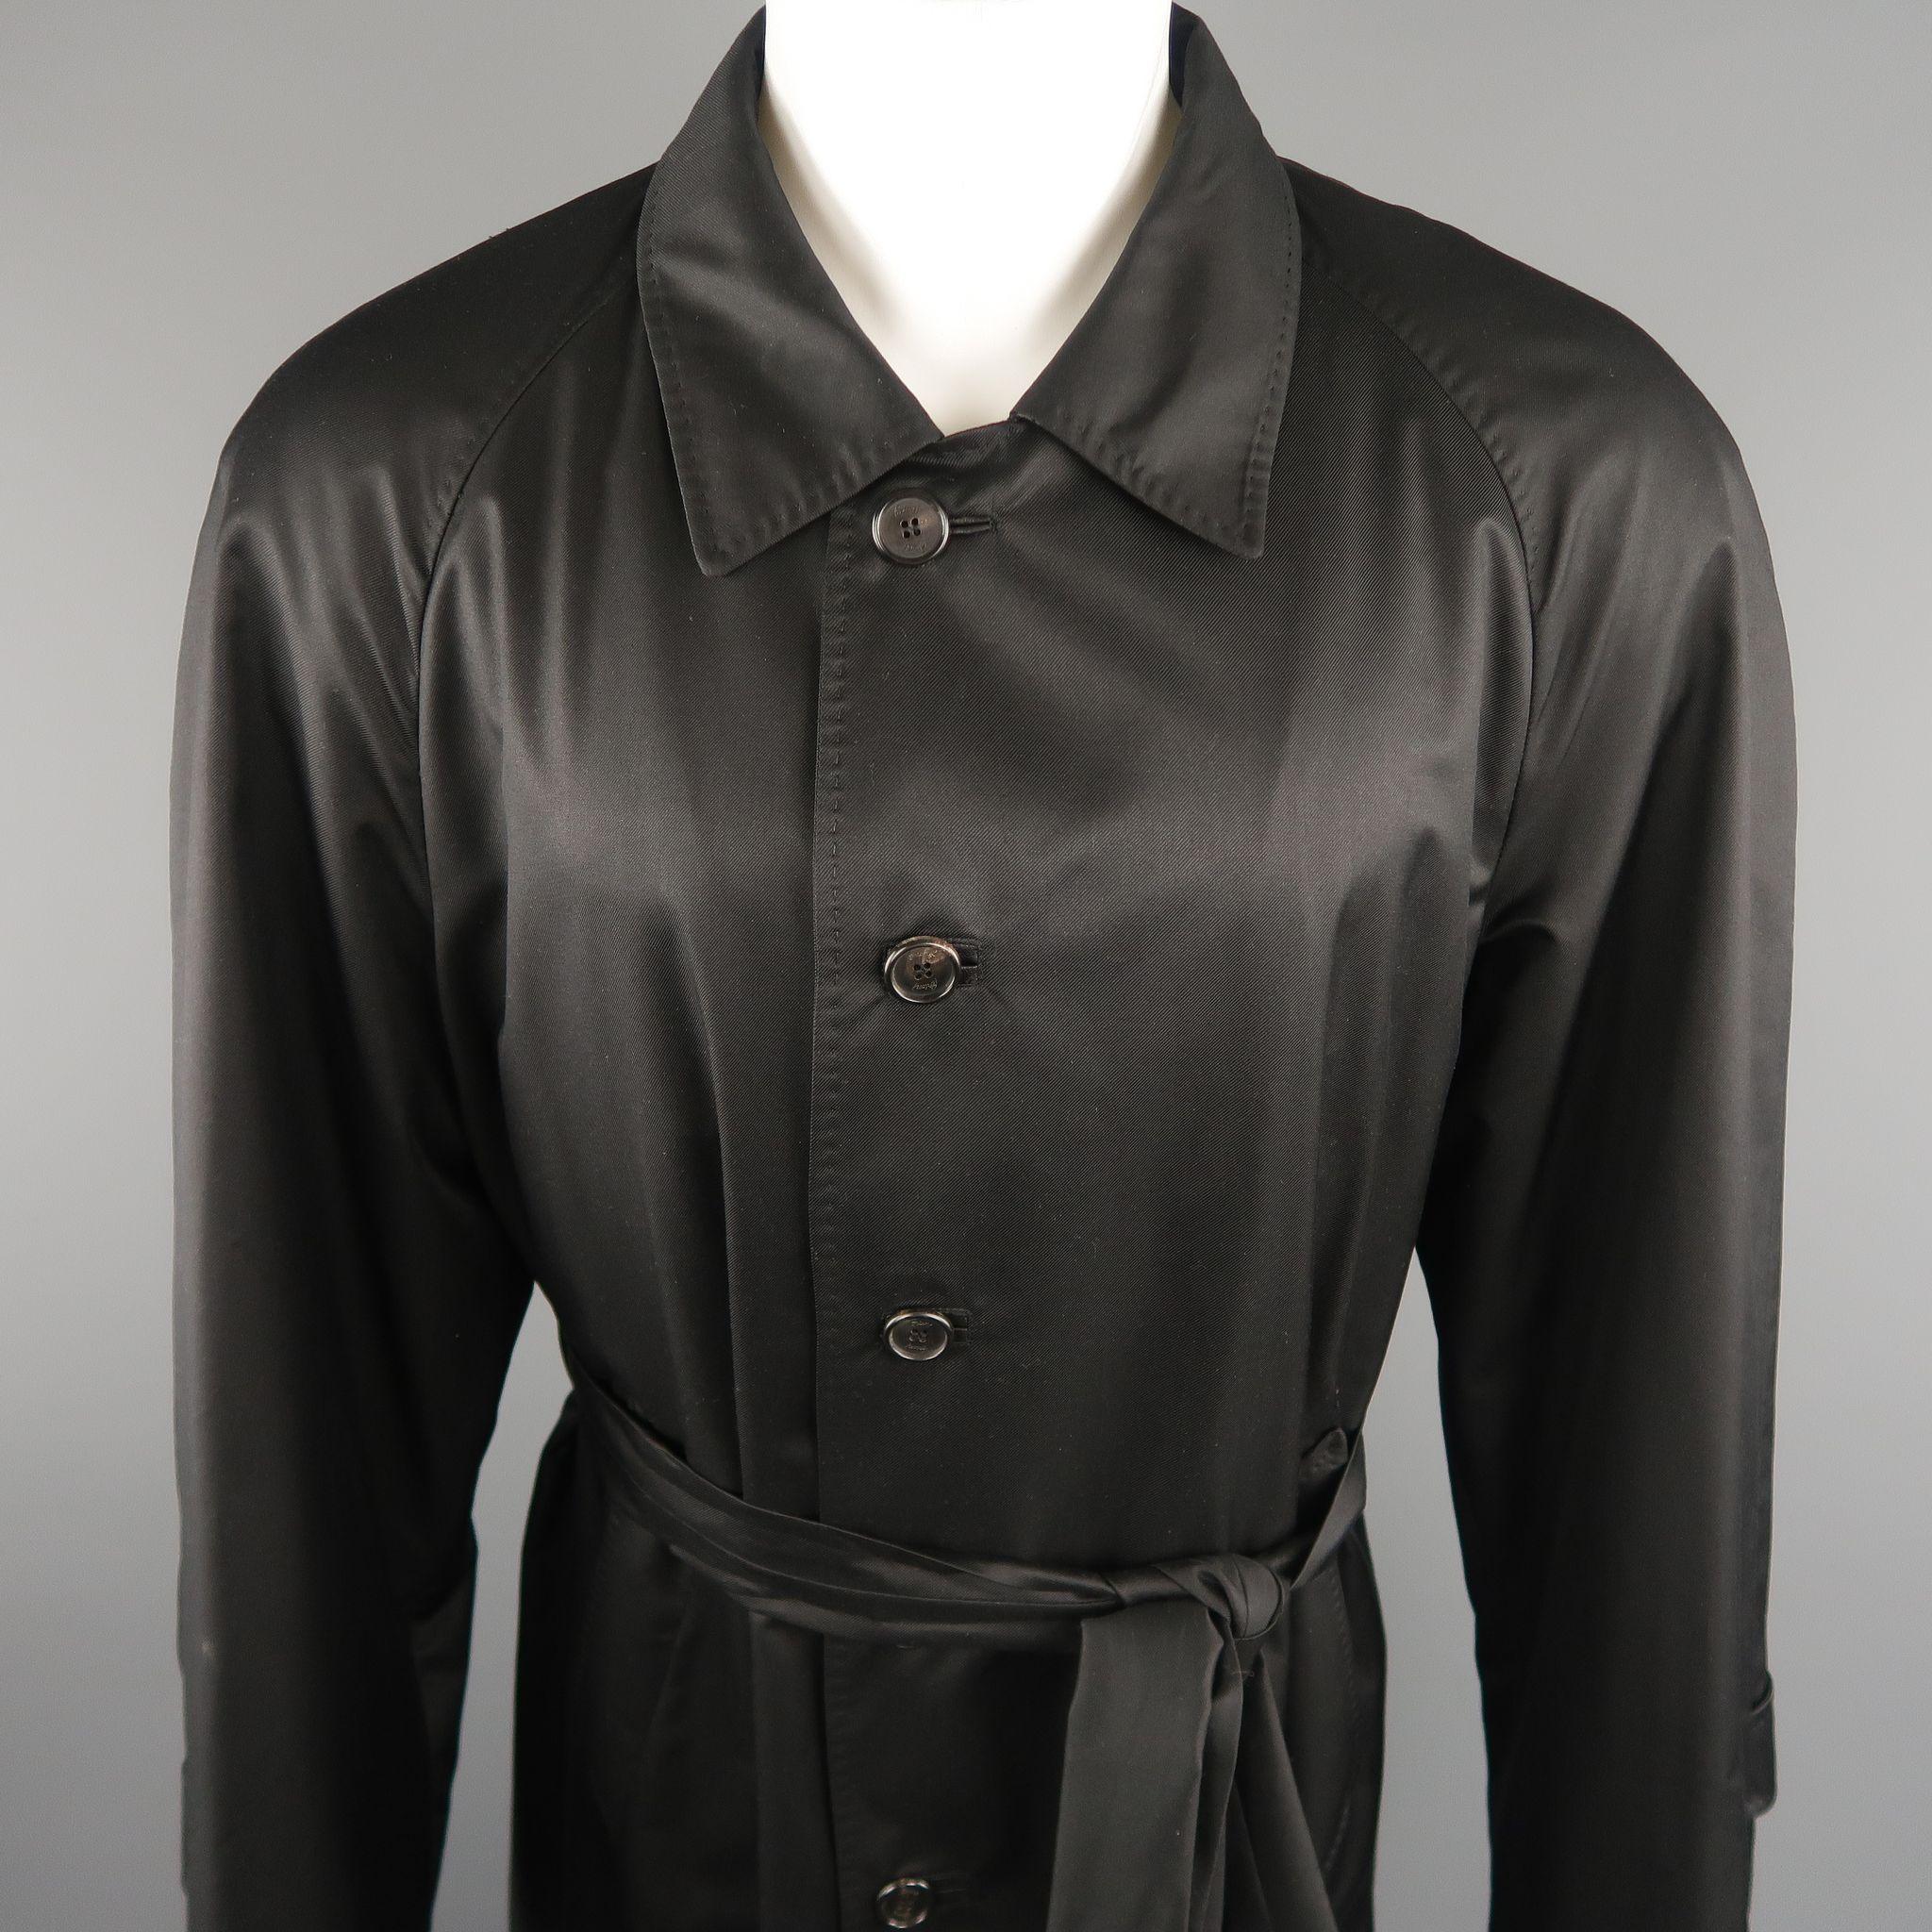 WILKES BASHFORD tailored by BRIONI long trench coat comes in a black solid silk, with slit pockets, leather button holes, brioni lining, back vent and belt. Made in Italy. 

Excellent Pre-Owned Condition.
Marked: 48 US

Measurements:

Shoulder: 17.5